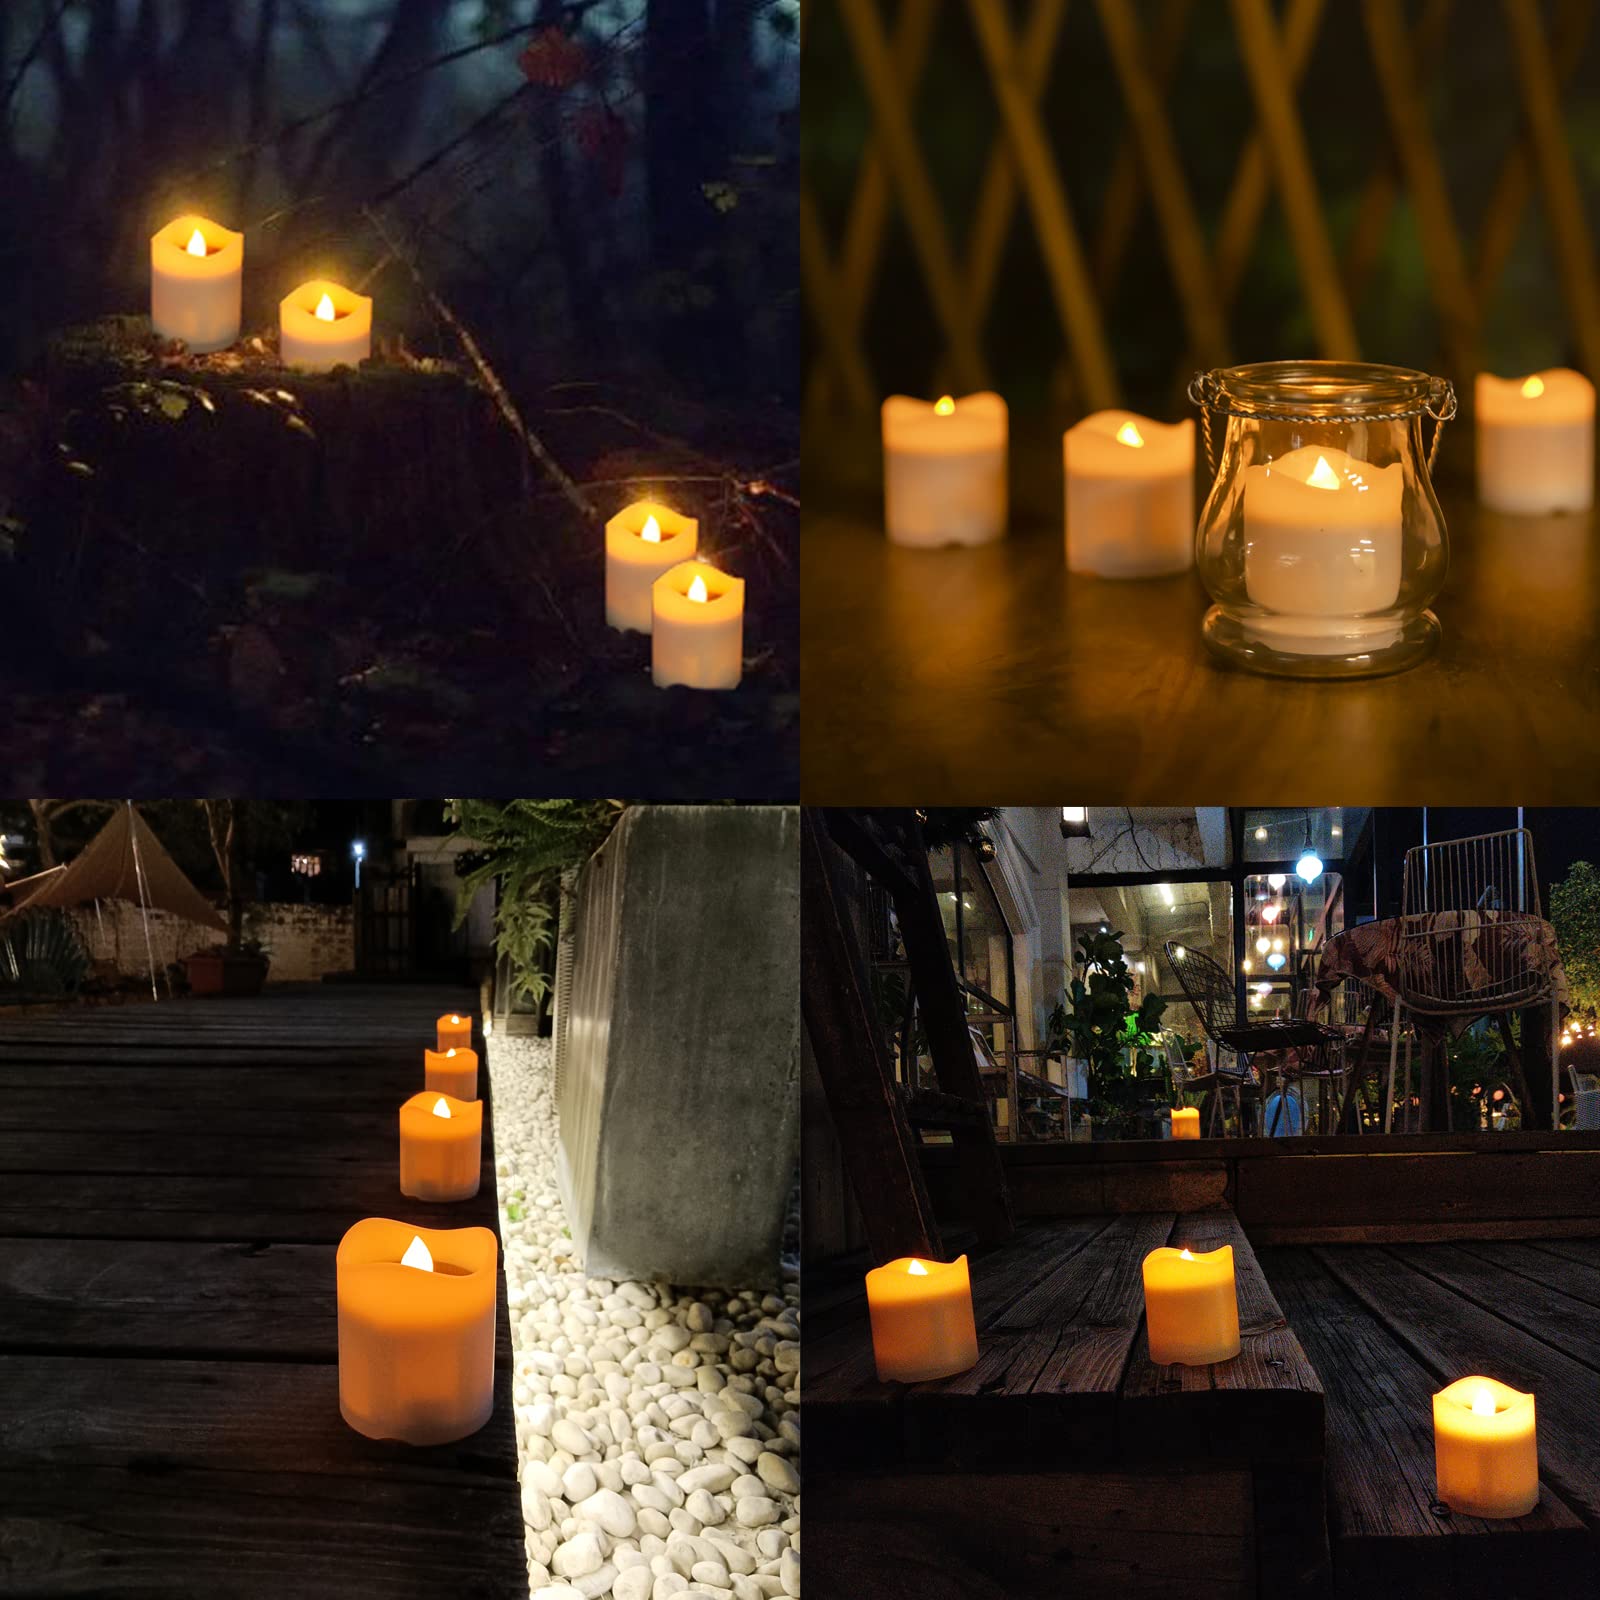 ZHONGXIN Solar Powered LED Candle Lights, Flameless Rechargeable Amber Flickering Votive Candles Waterproof for Patio Yard Pathway Window Outdoor Lantern Decor(4 Pack) (Solar Votive Candles)